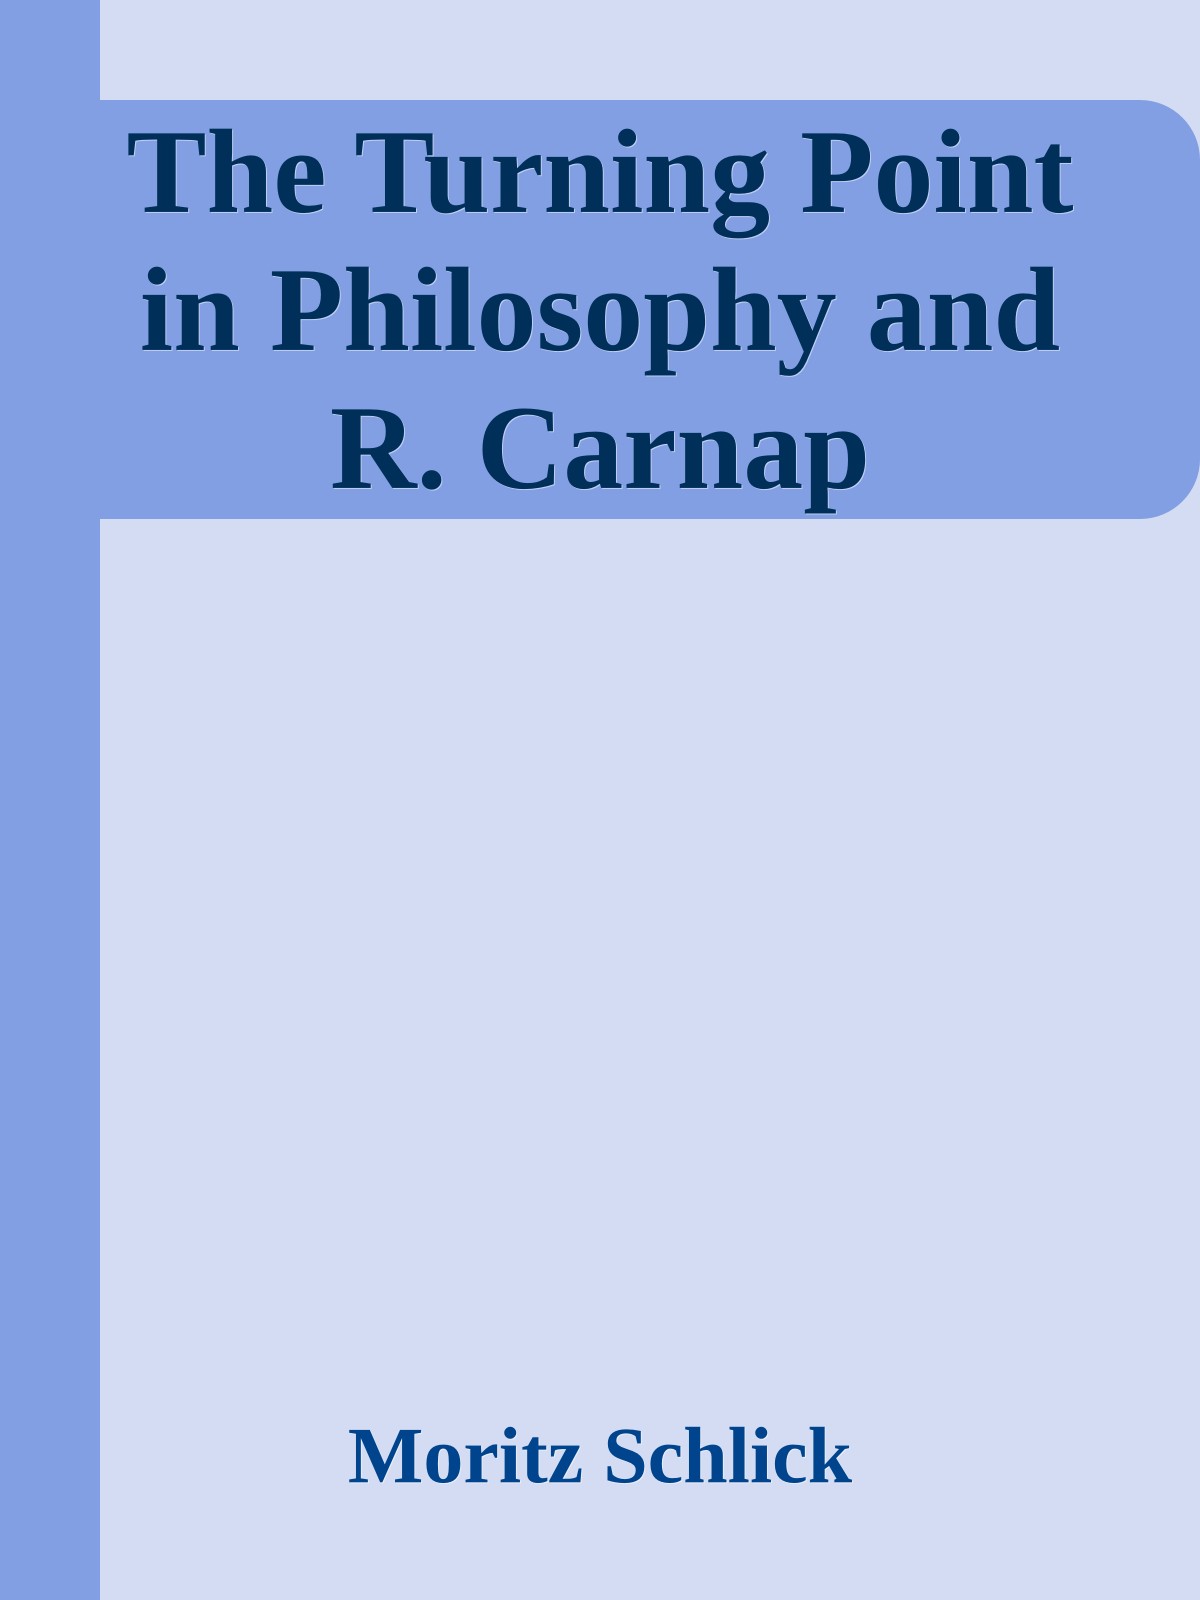 The Turning Point in Philosophy and R. Carnap